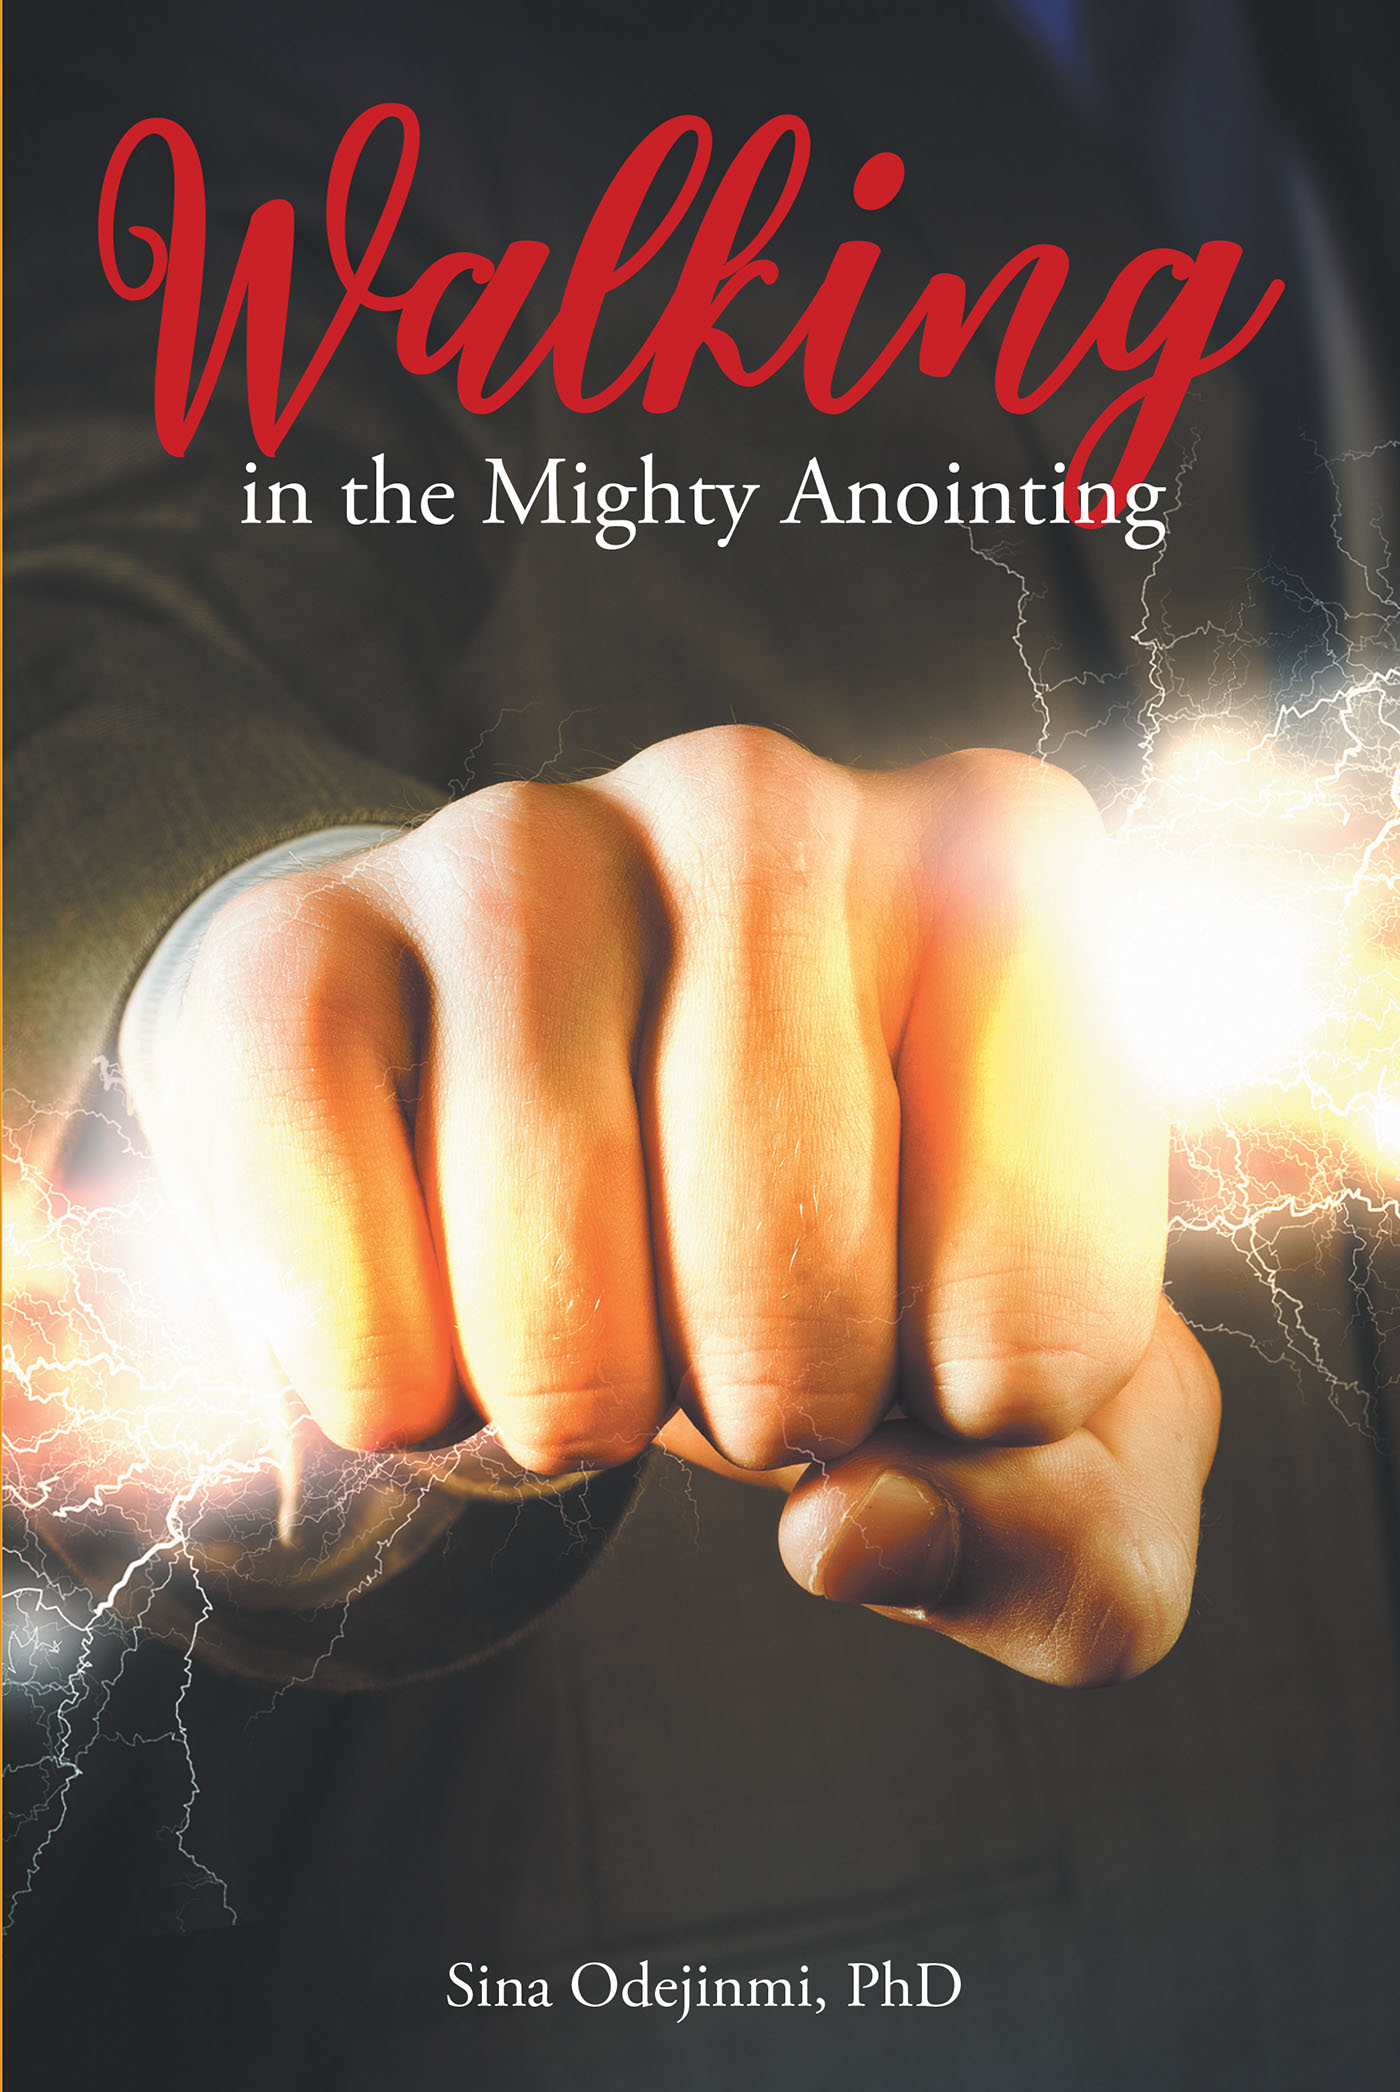 Sina Odejinmi, PhD’s Newly Released “Walking in the Mighty Anointing” is an Empowering Message of Connection Between Mankind and the Holy Trinity